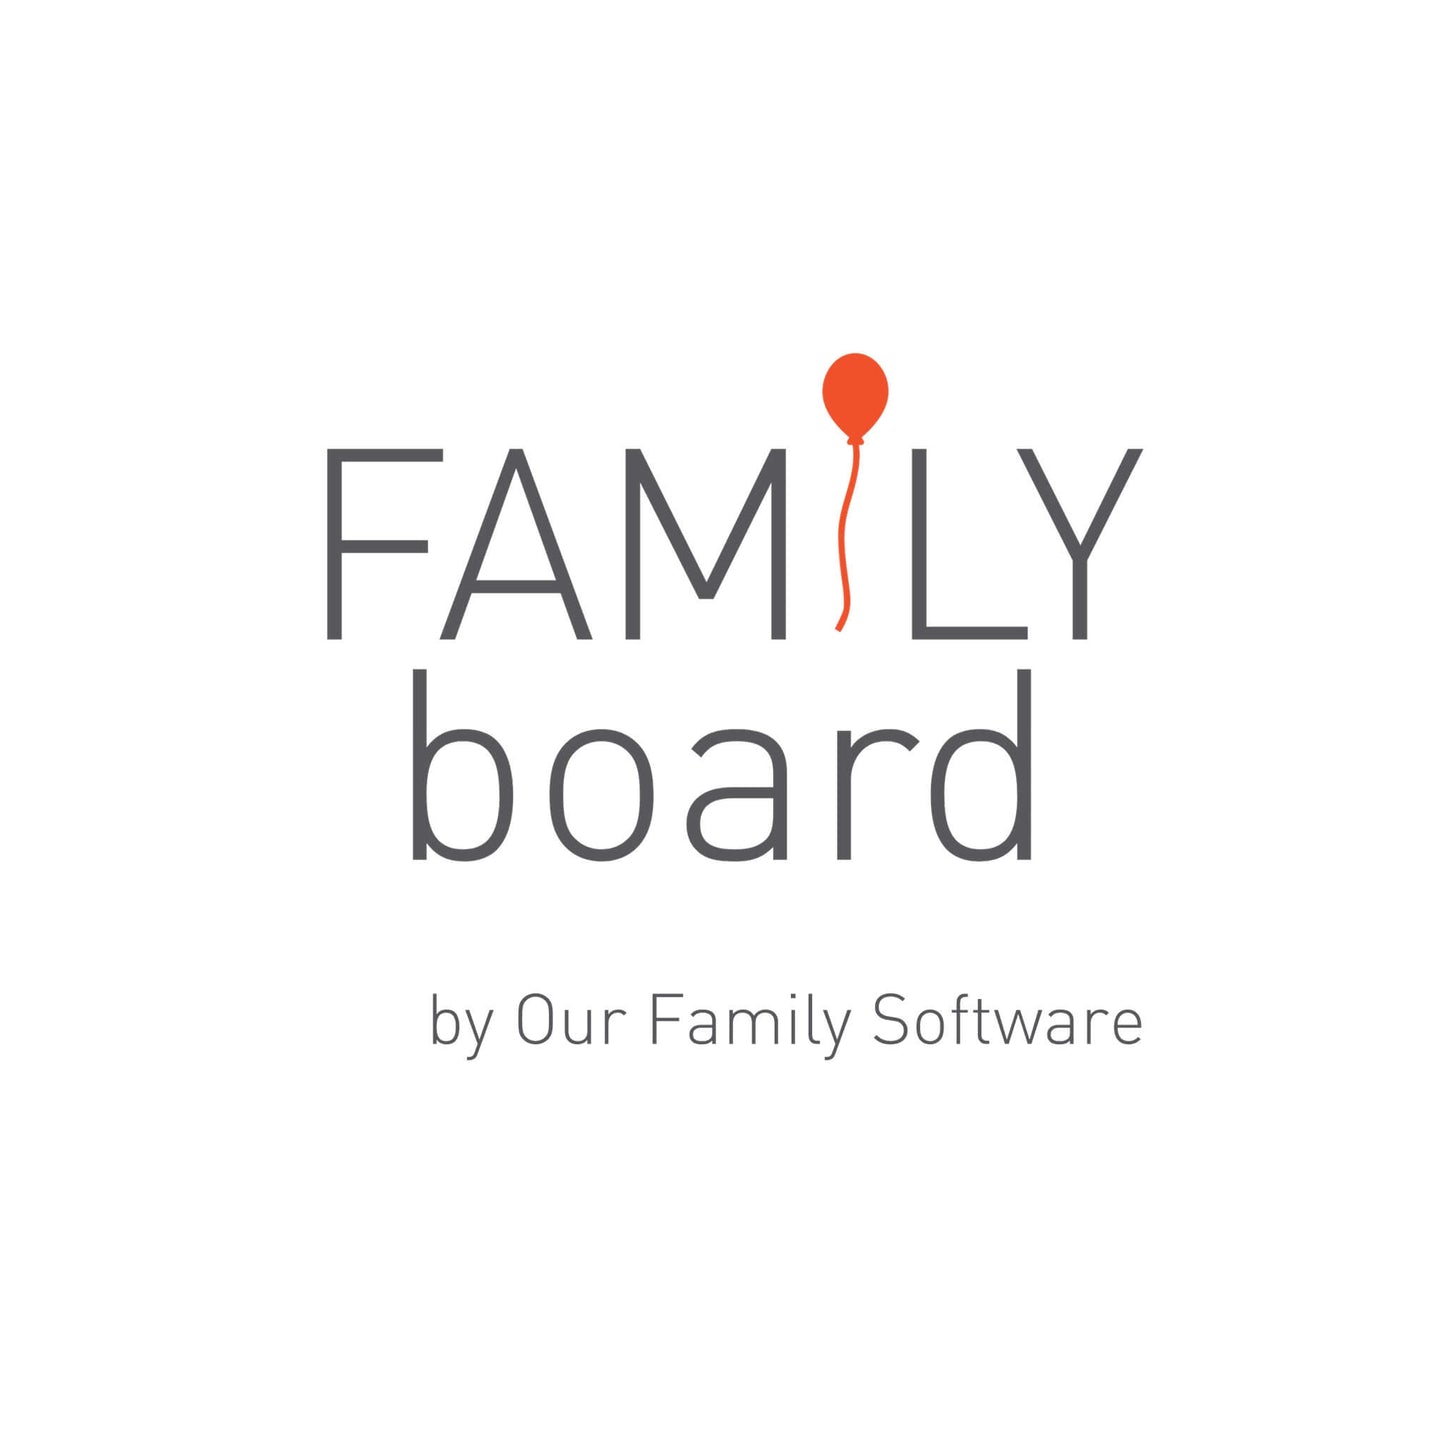 FamilyBoard a family organizer app with an interactive board. Makes time for meaningful things.